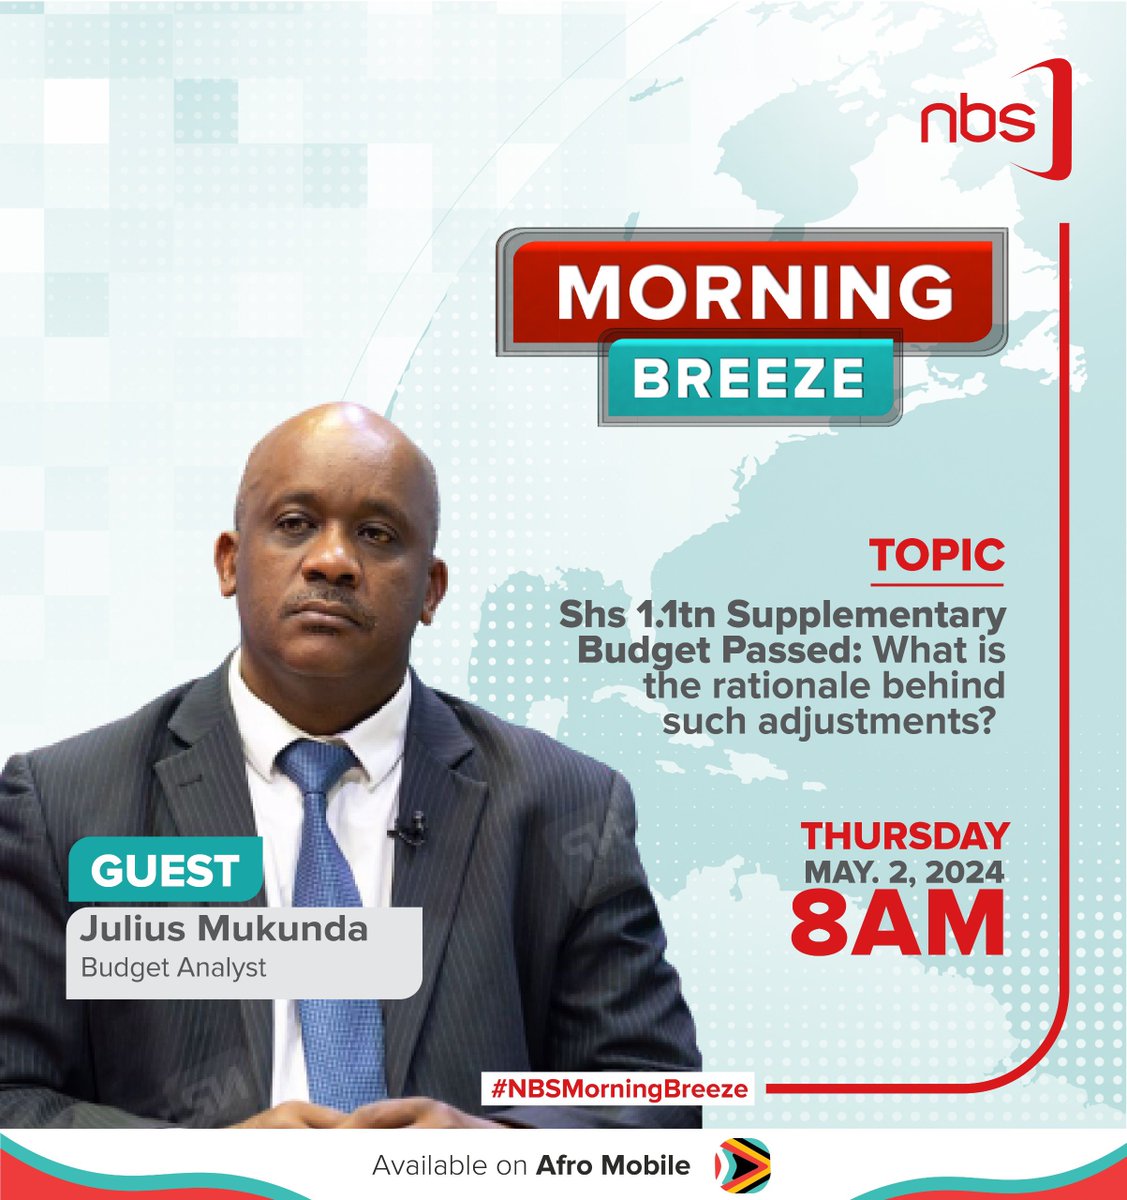 UGX 1.1 trillion Supplementary Budget Passed: What is the rationale behind such adjustments?

Hon Ssemujju Nganda and Julius Mukunda will join us this morning for the Topical Discussion to discuss this and more at 8 AM.

Don't miss the show!

#NBSUpdates #NBSMorningBreeze